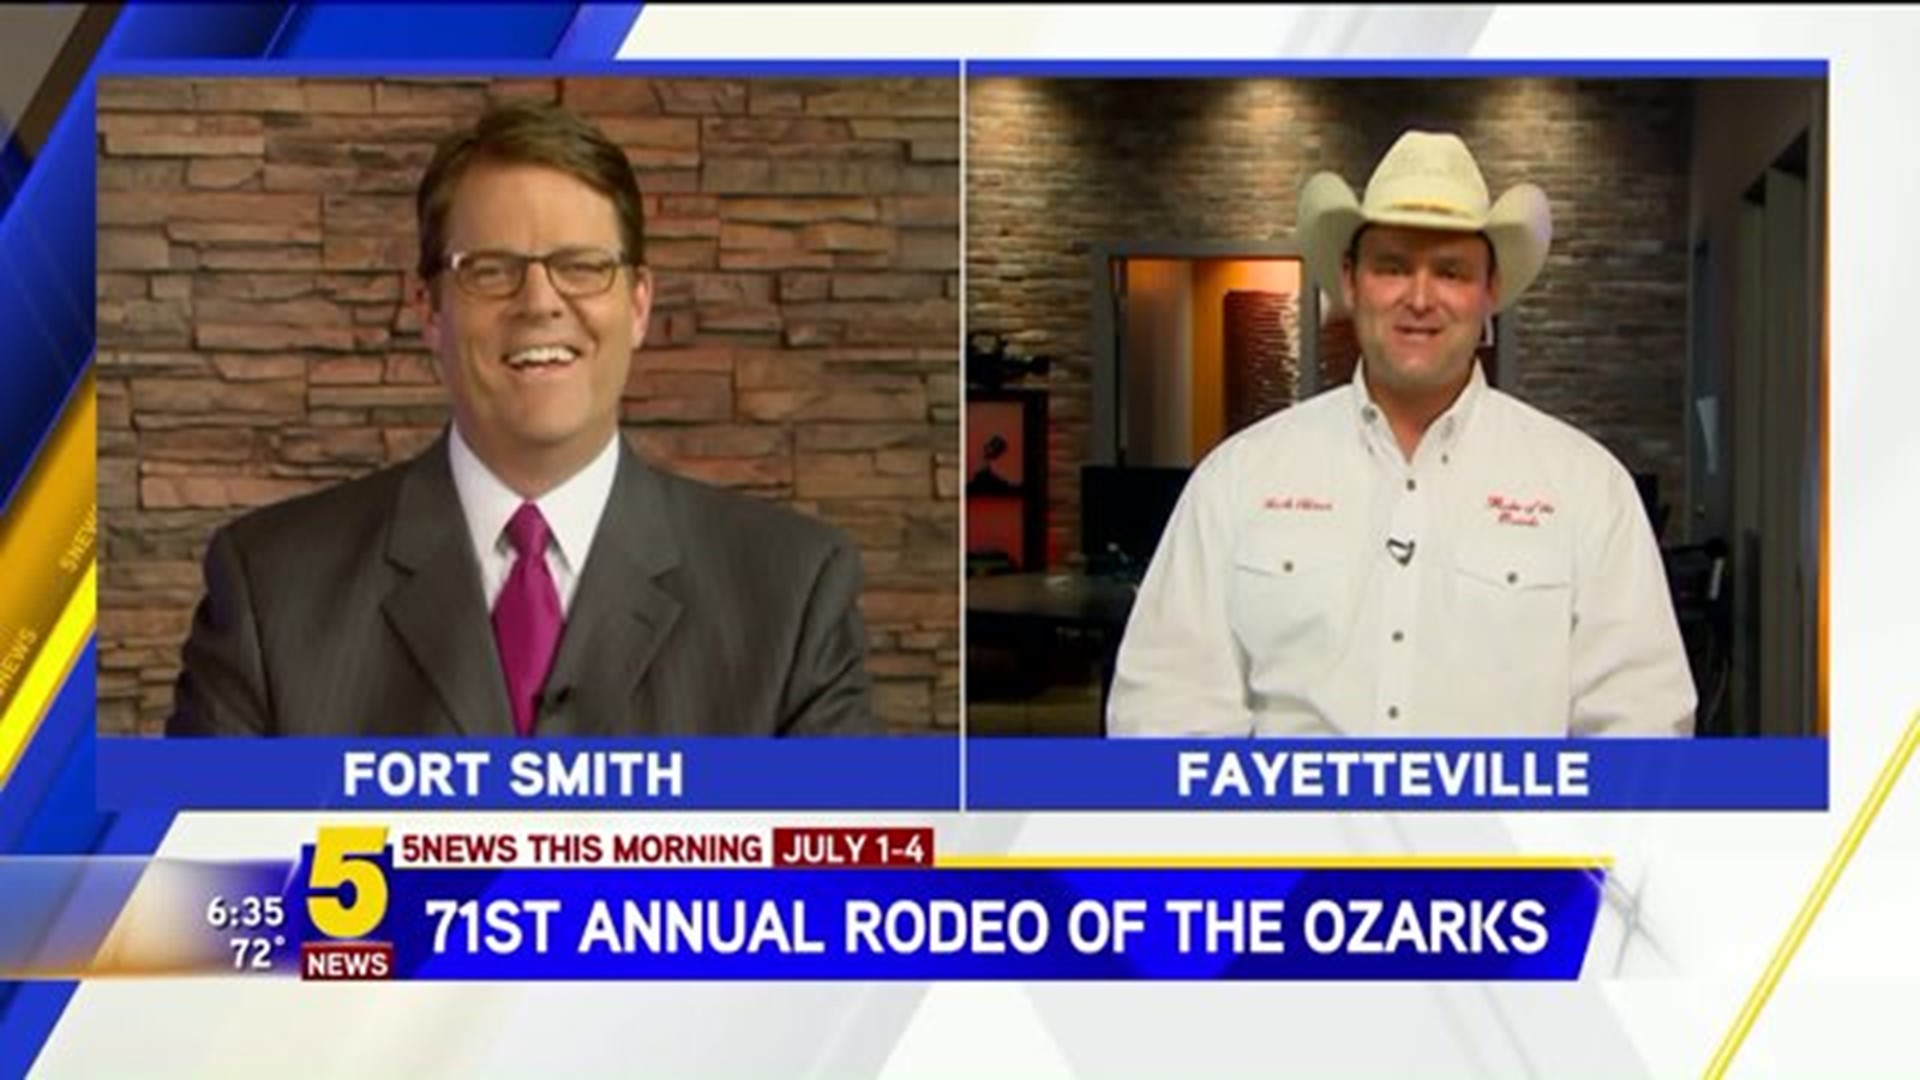 71st Annual Rodeo of the Ozarks